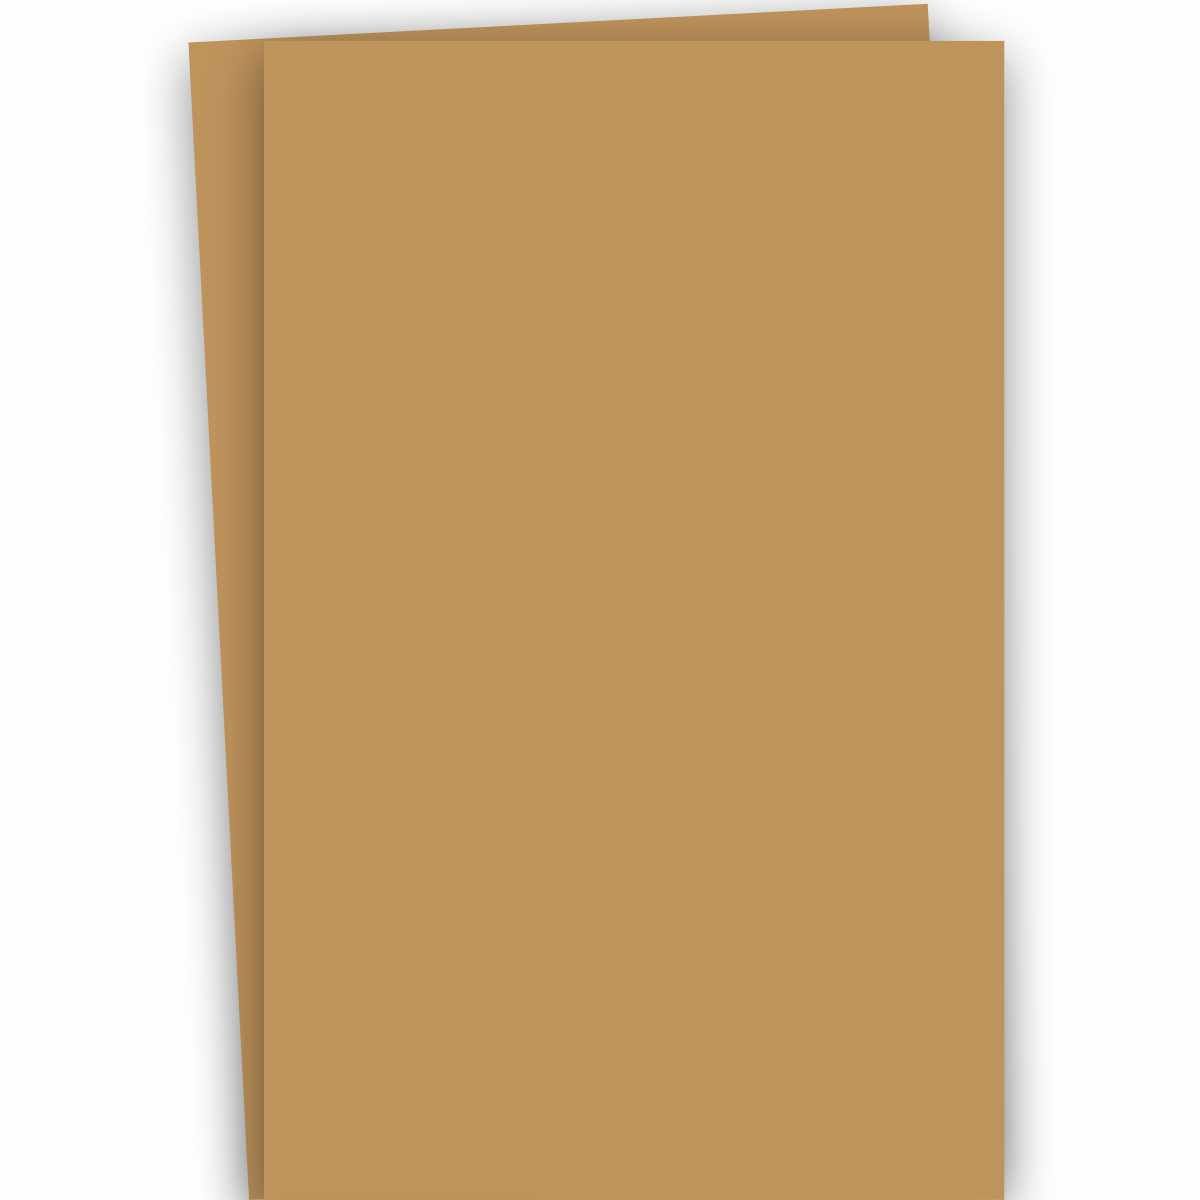 Burano BUFF (02) - 12X12 Cardstock Paper - 92lb Cover (250gsm